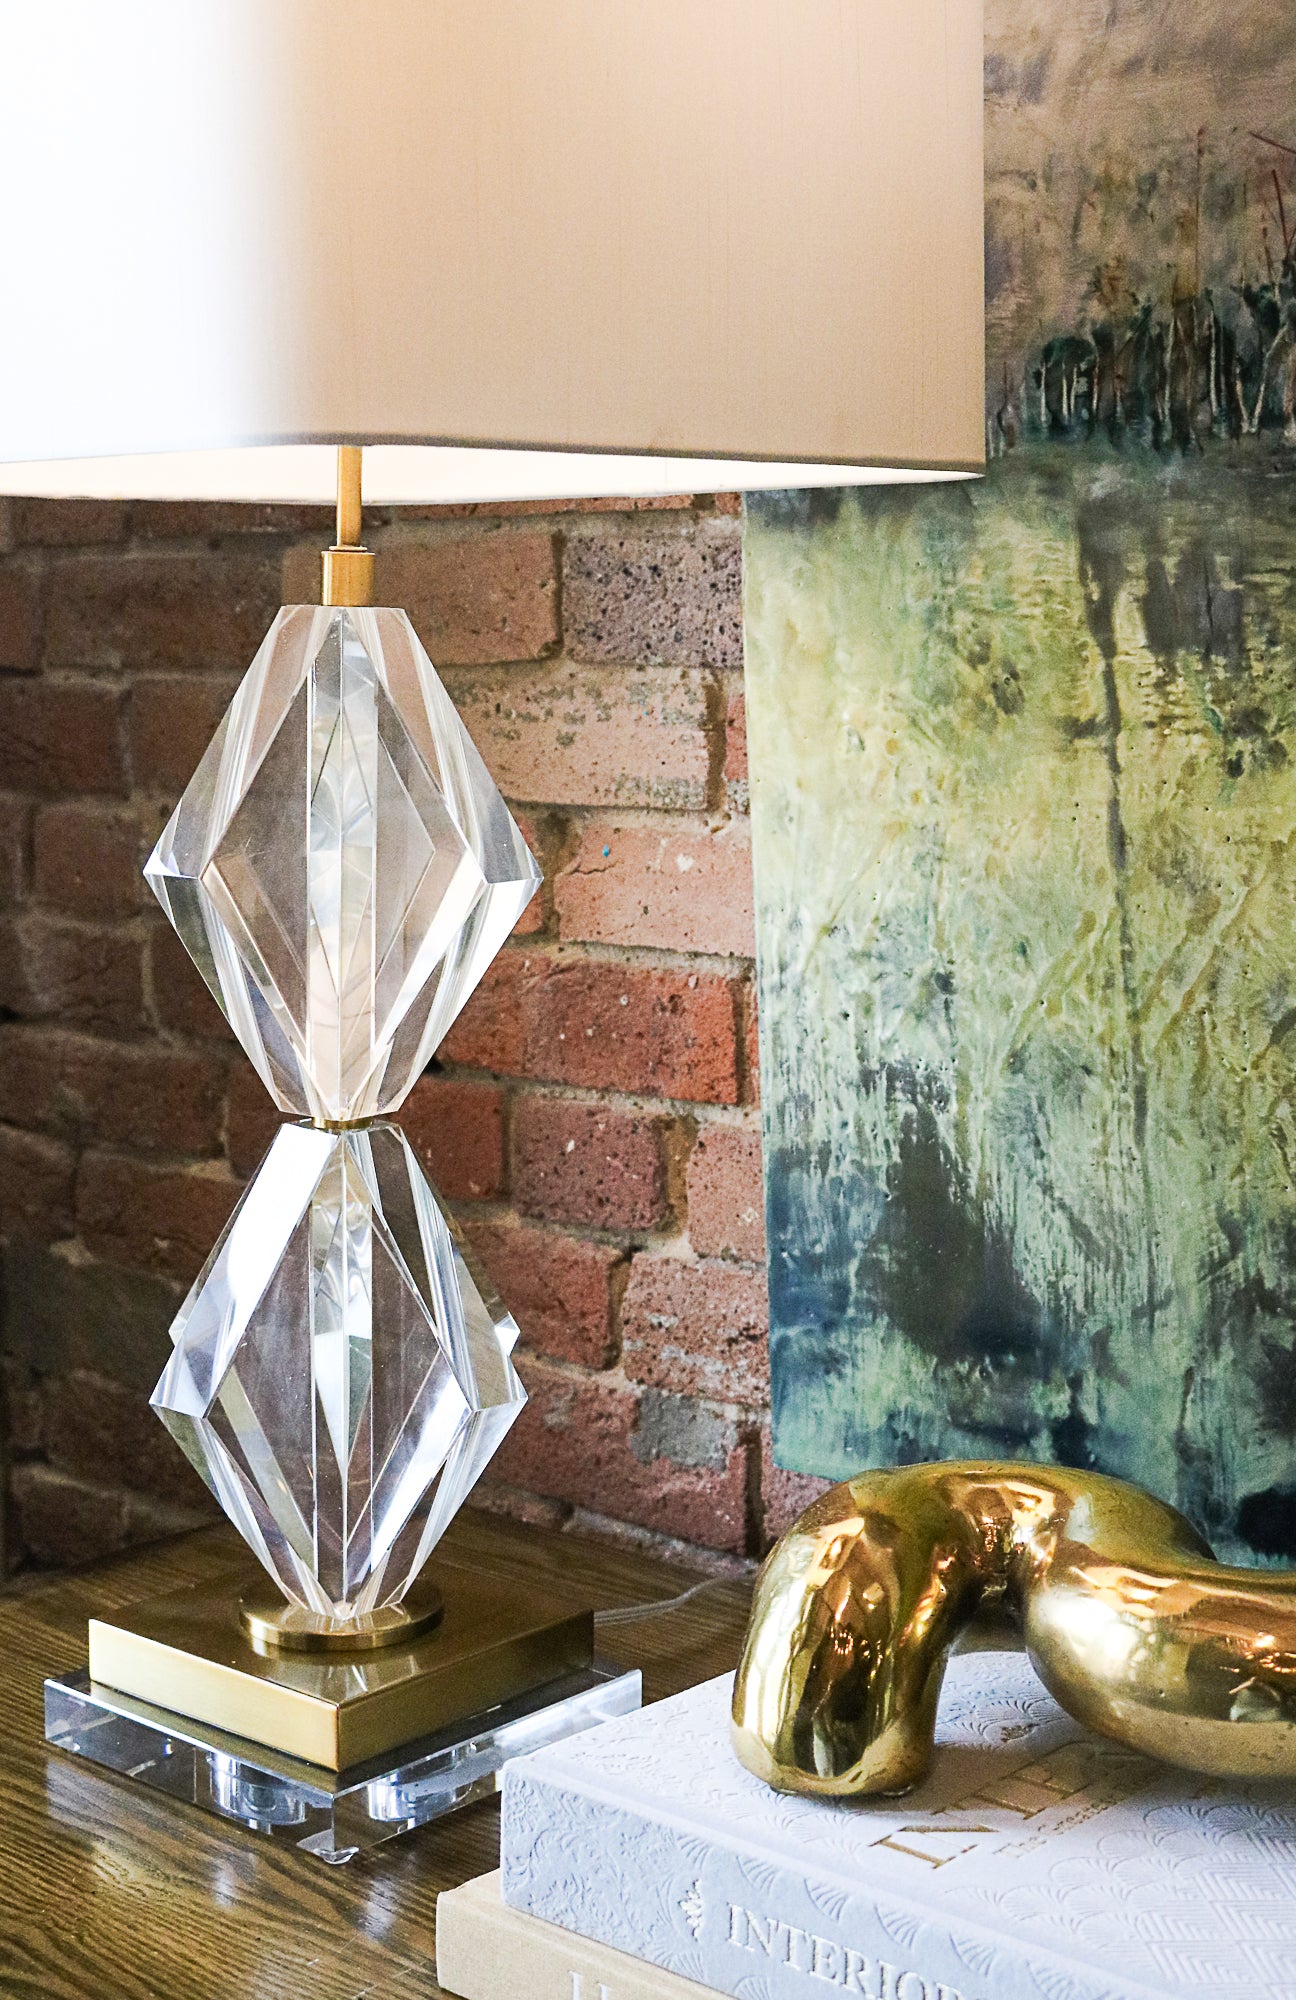 Euclid Table Lamp - Couture Lamps